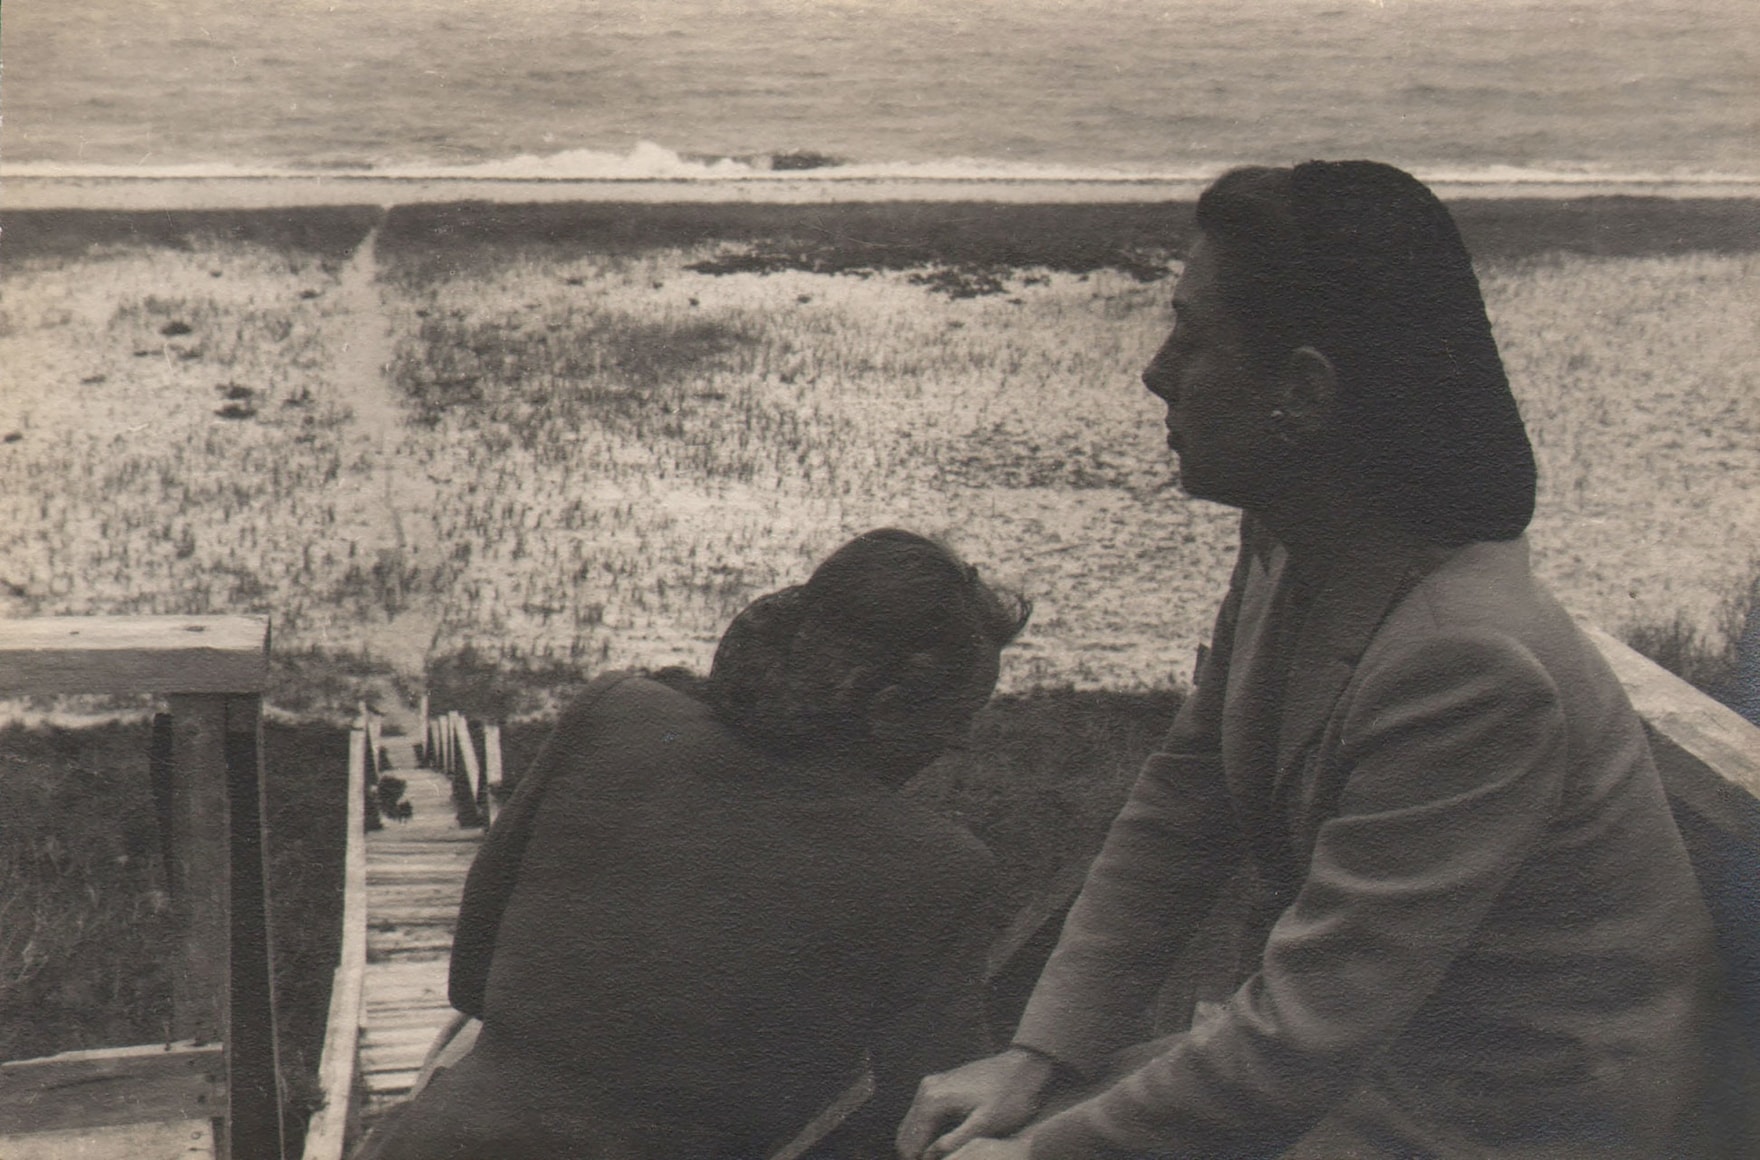 PaJaMa, Fidelma Cadmus and Margaret French, Nantucket, ​c. 1945. Two women seated at the top of a tall flight of wooden stairs that lead down to a beach. One faces left, the other has her back to the camera.